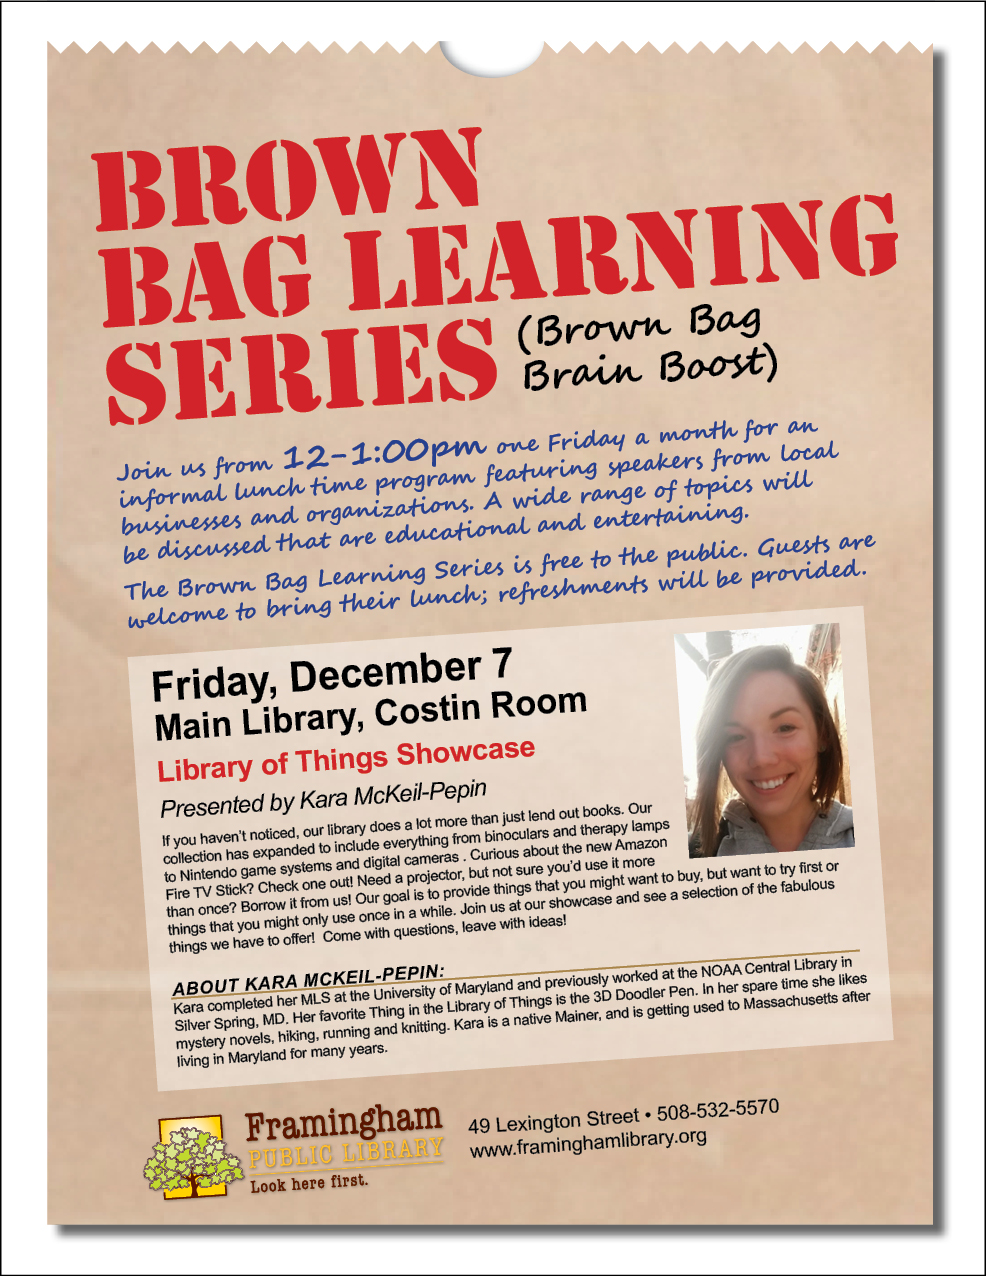 Brown Bag Learning Series: Library of Things Showcase thumbnail Photo